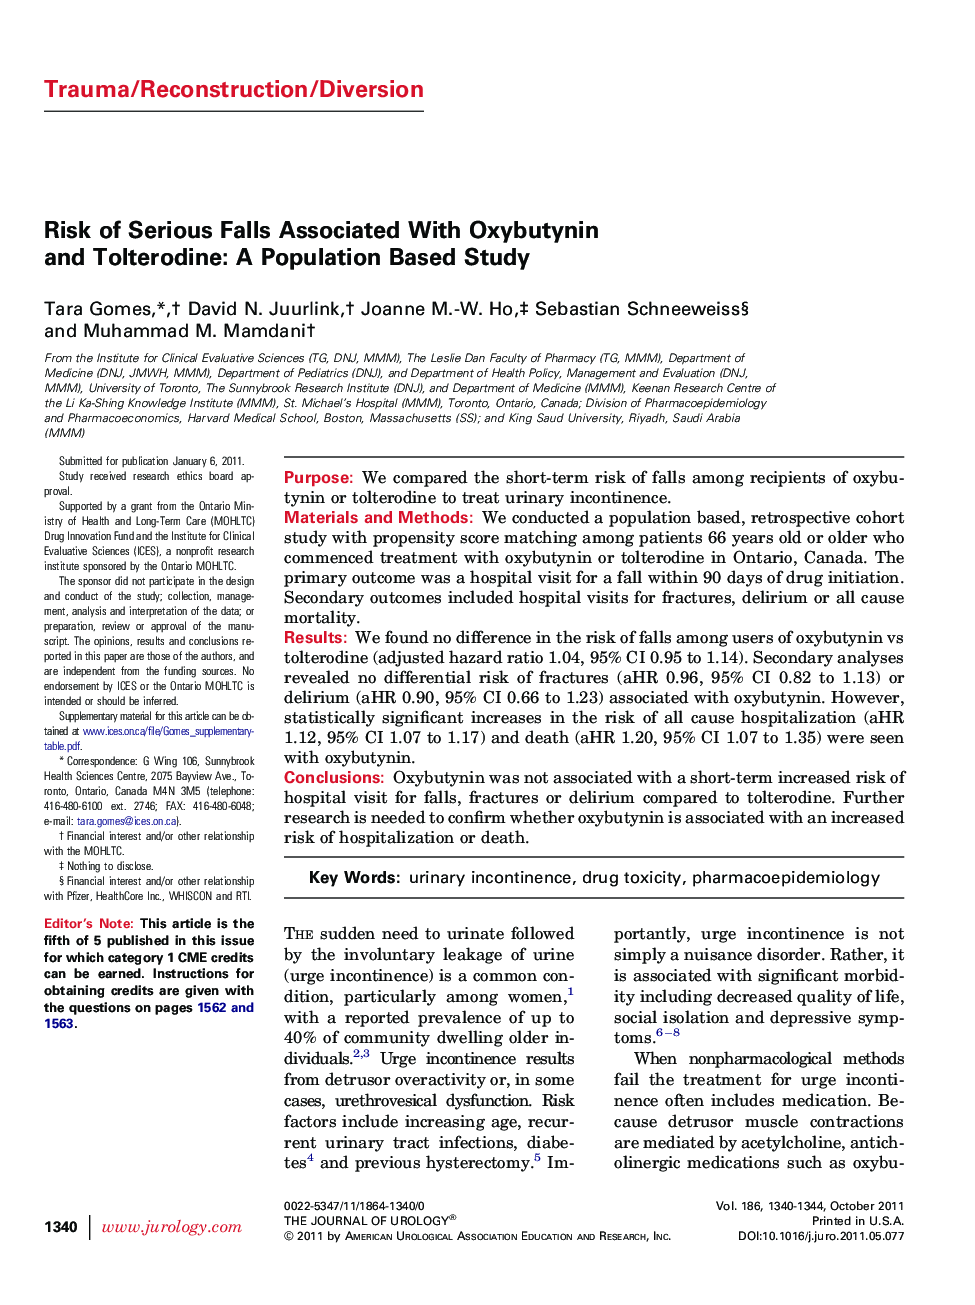 Risk of Serious Falls Associated With Oxybutynin and Tolterodine: A Population Based Study 